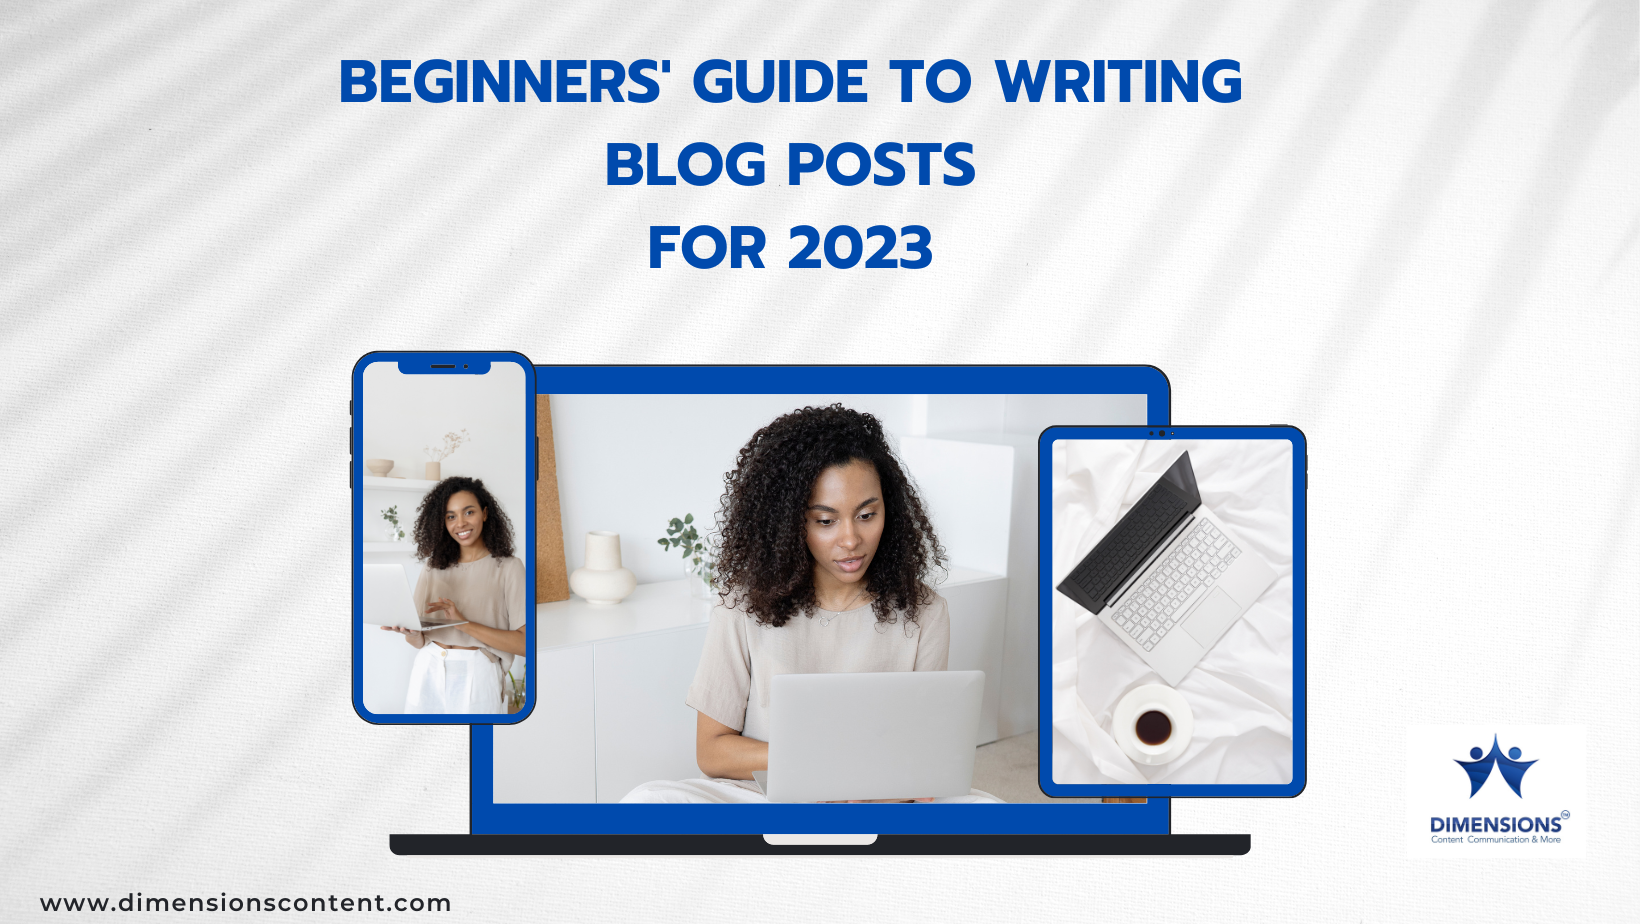 There are many different types of blogs, but a good blog often has certain characteristics regardless of its subject matter. So whether you are writing a movie review blog on WordPress or a personal diary blog on Tumblr, here are some elements of a good blog post that you might want to incorporate into your work.